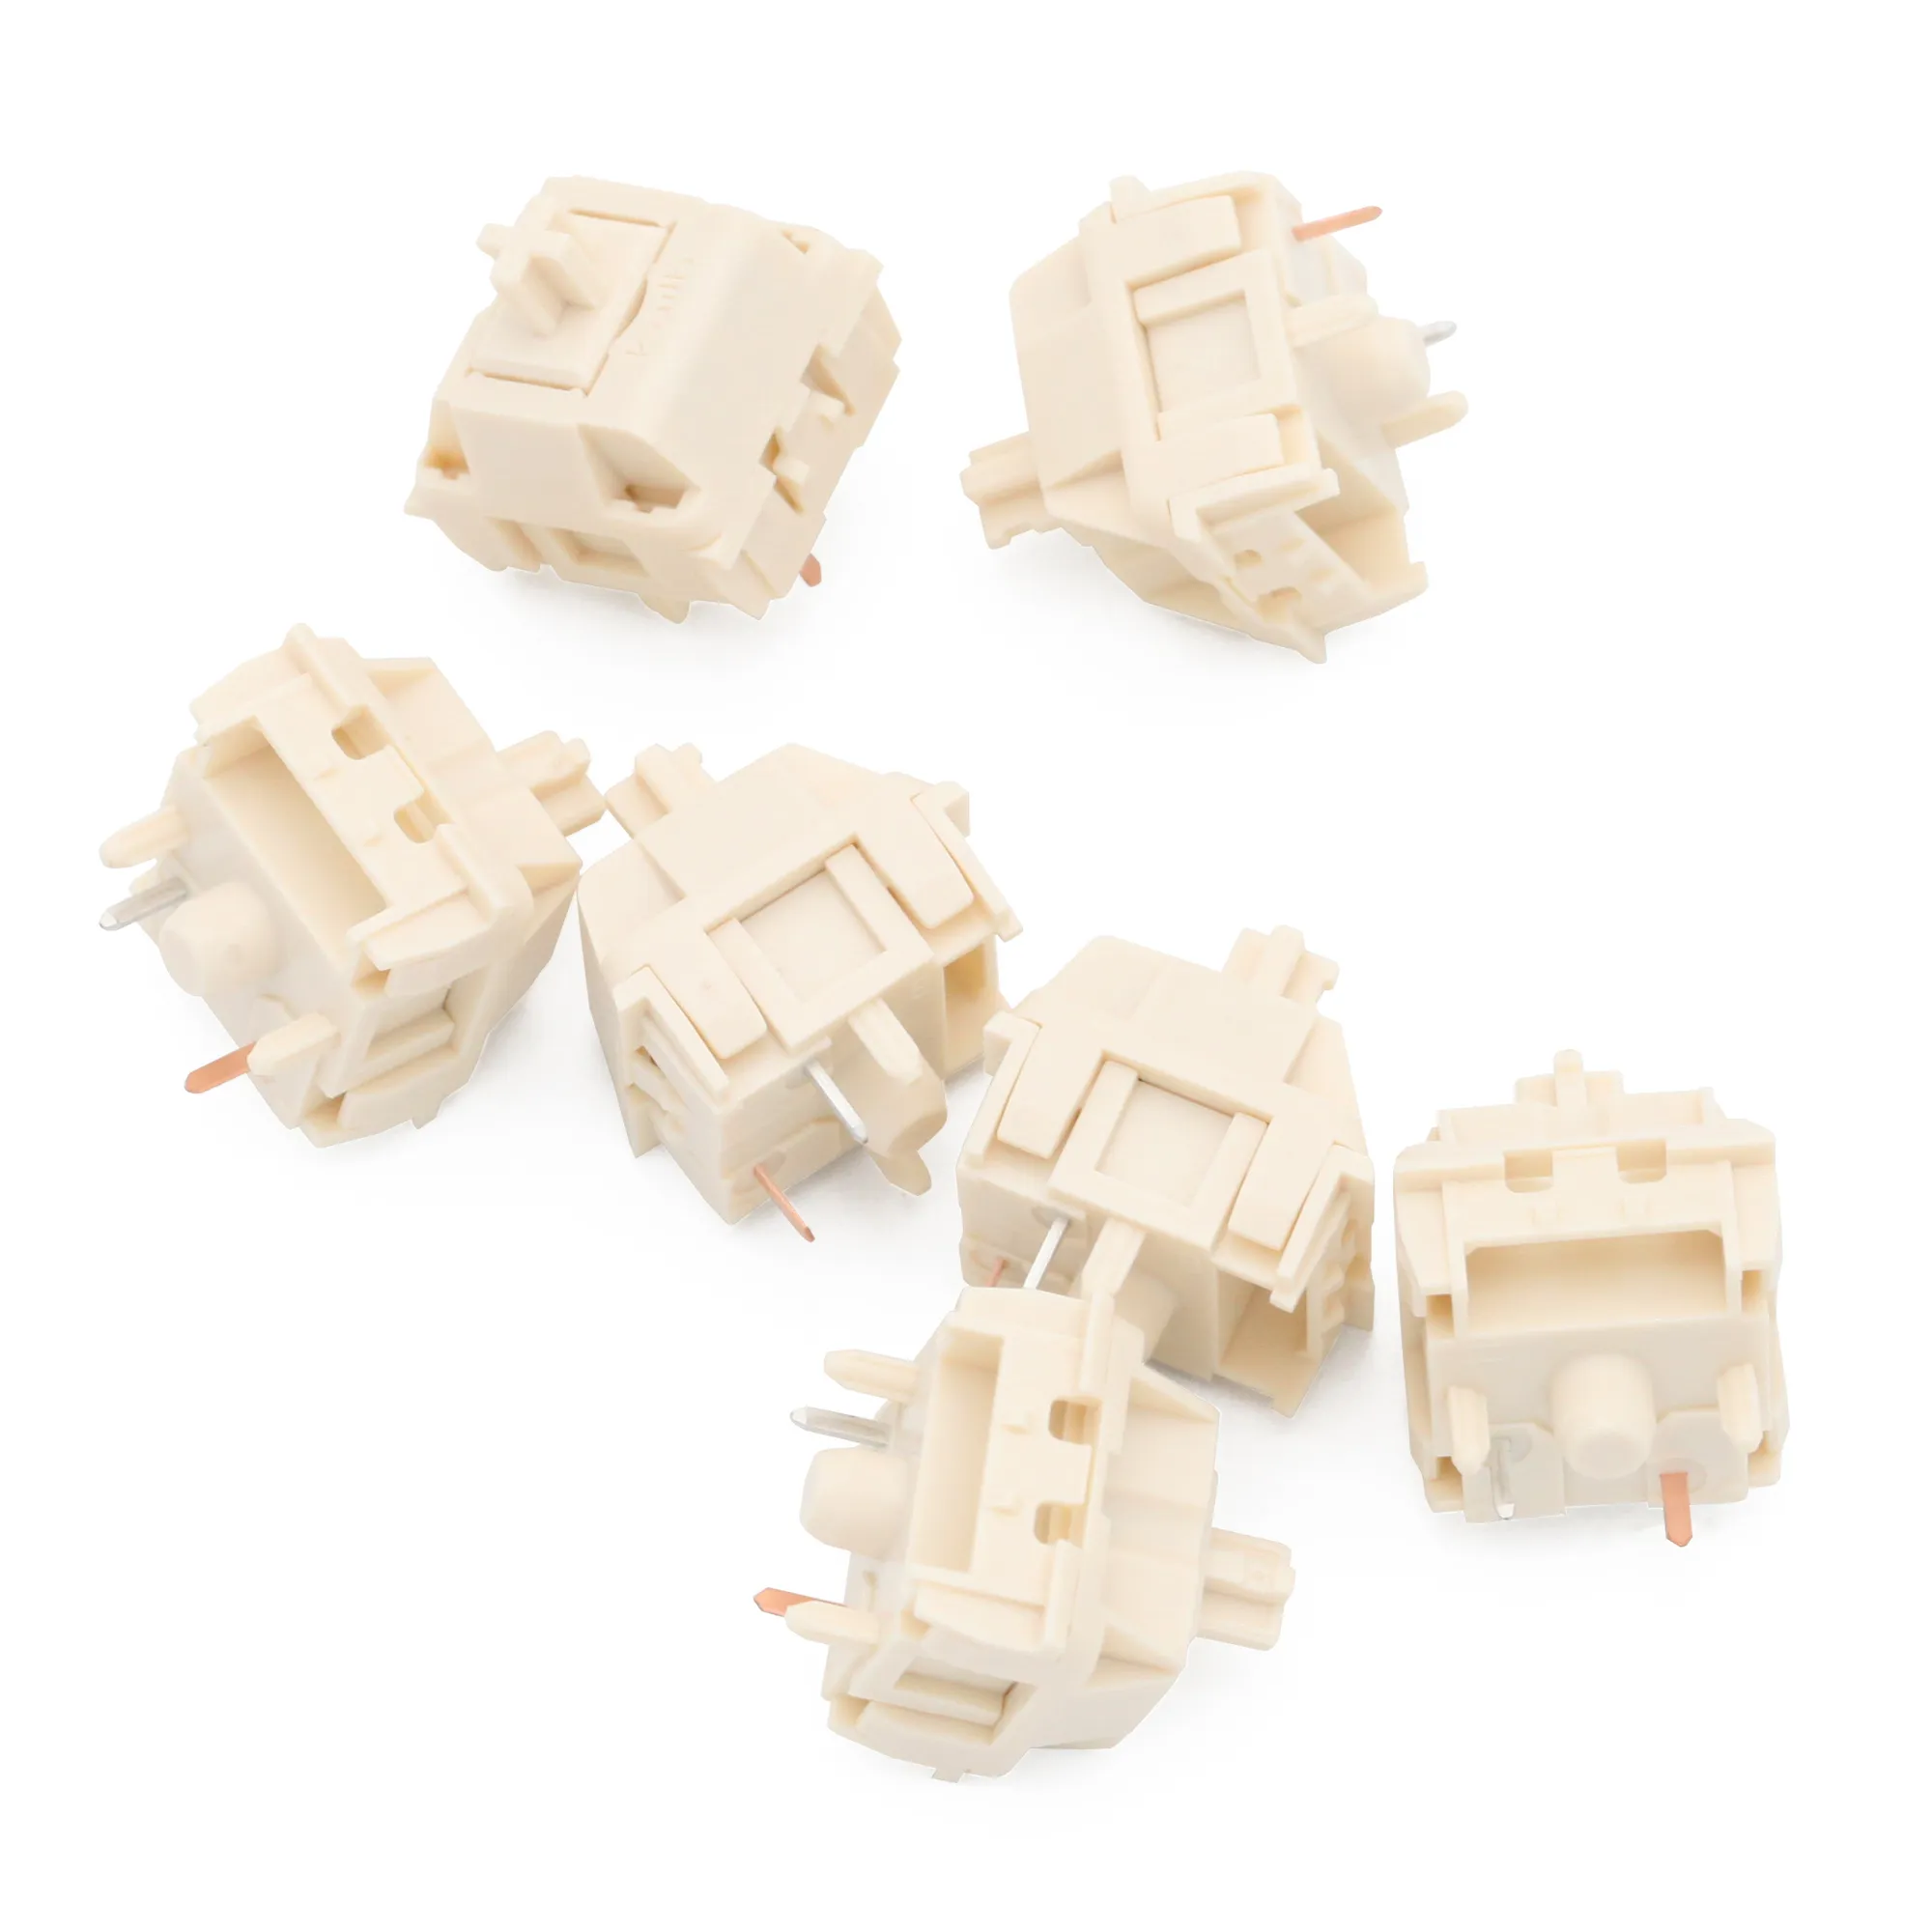 NovelKeys x Kailh Cream switch 4pin 5pin RGB SMD linear 55g force 